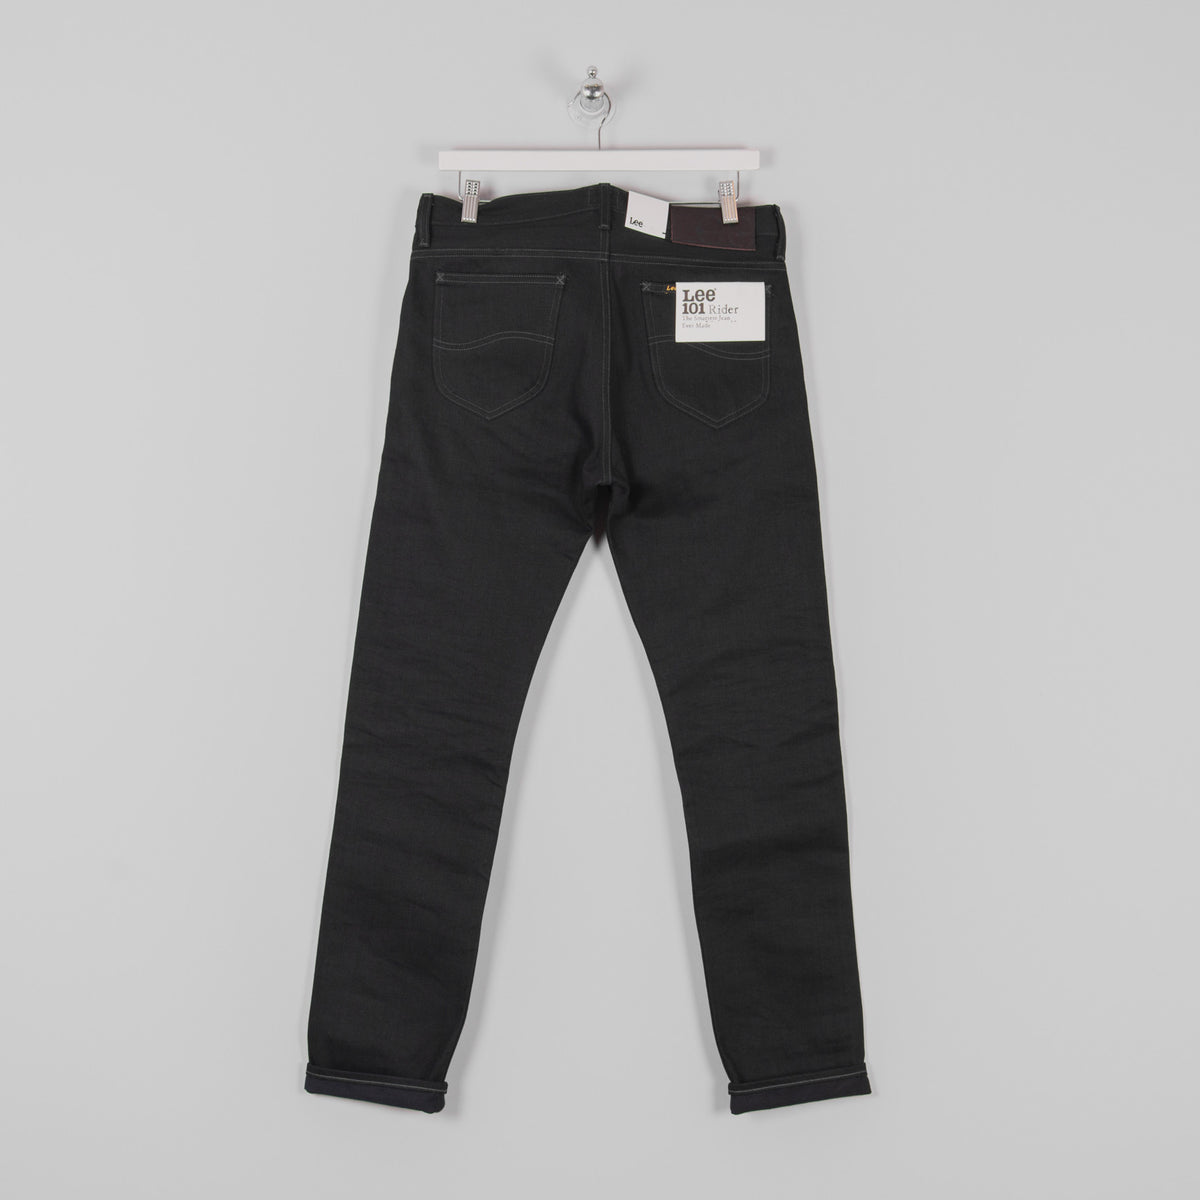 Buy Your Lee 101 Rider Black Jeans @ Union Clothing | Union Clothing